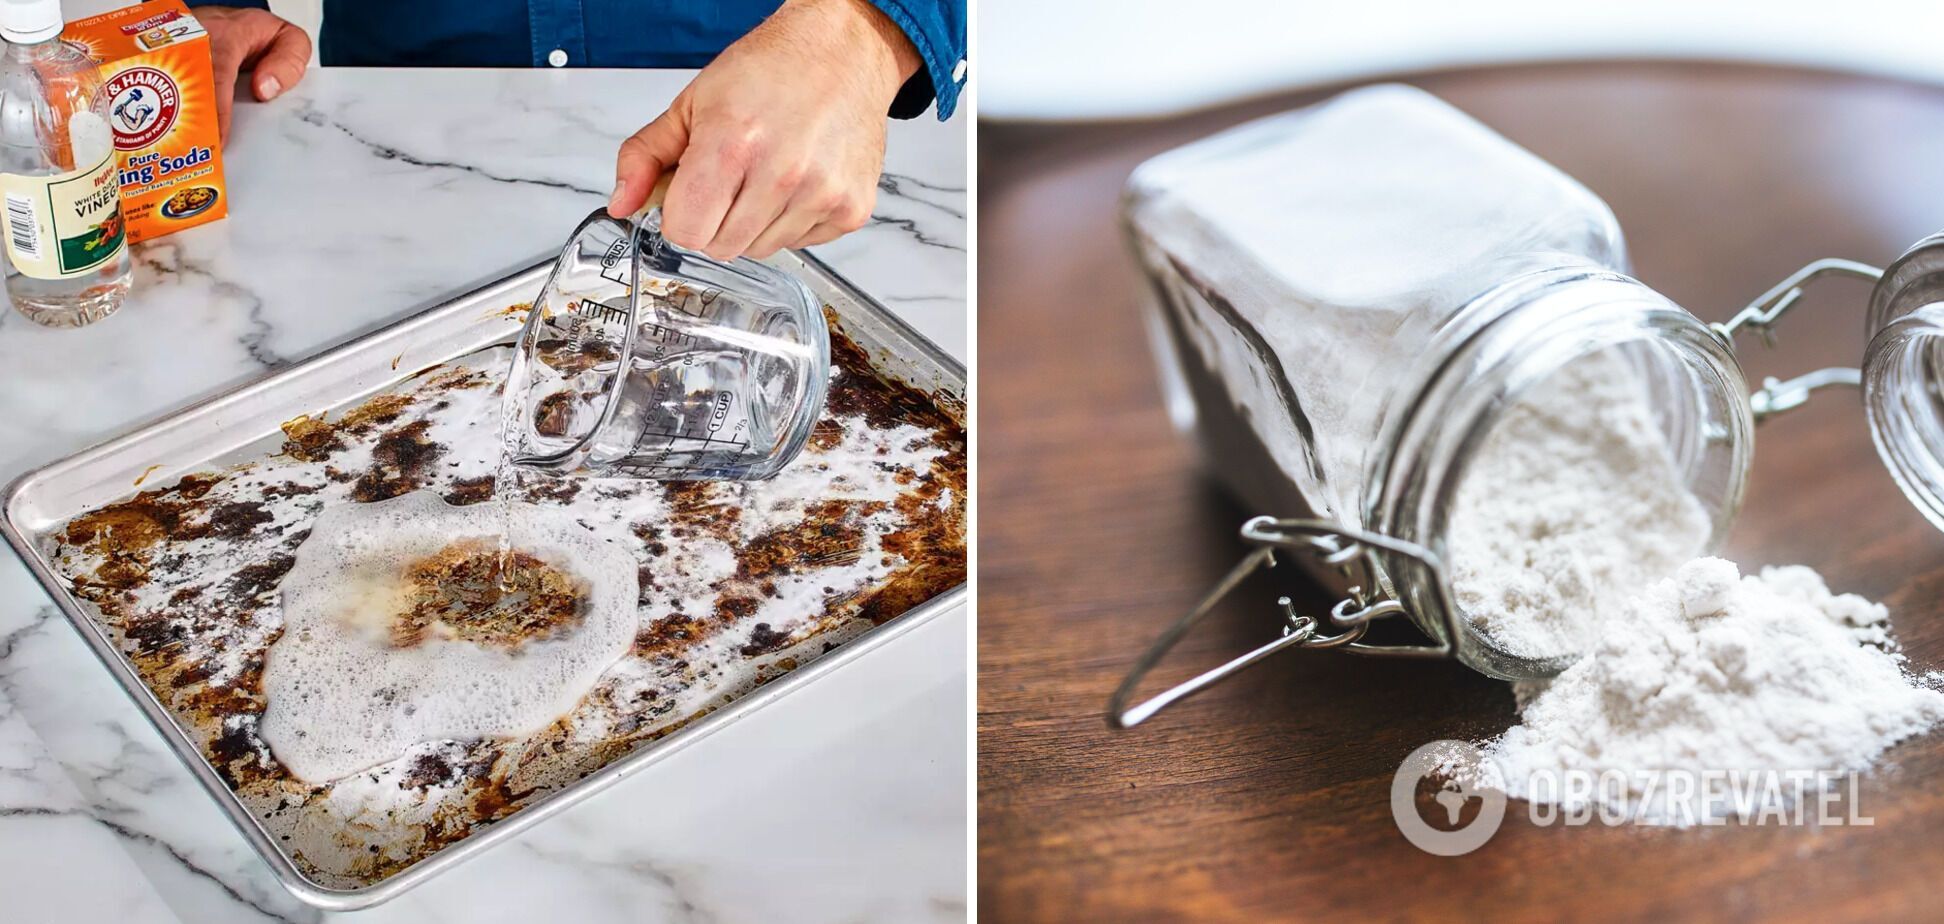 How to clean a baking pan quickly with vinegar and baking soda